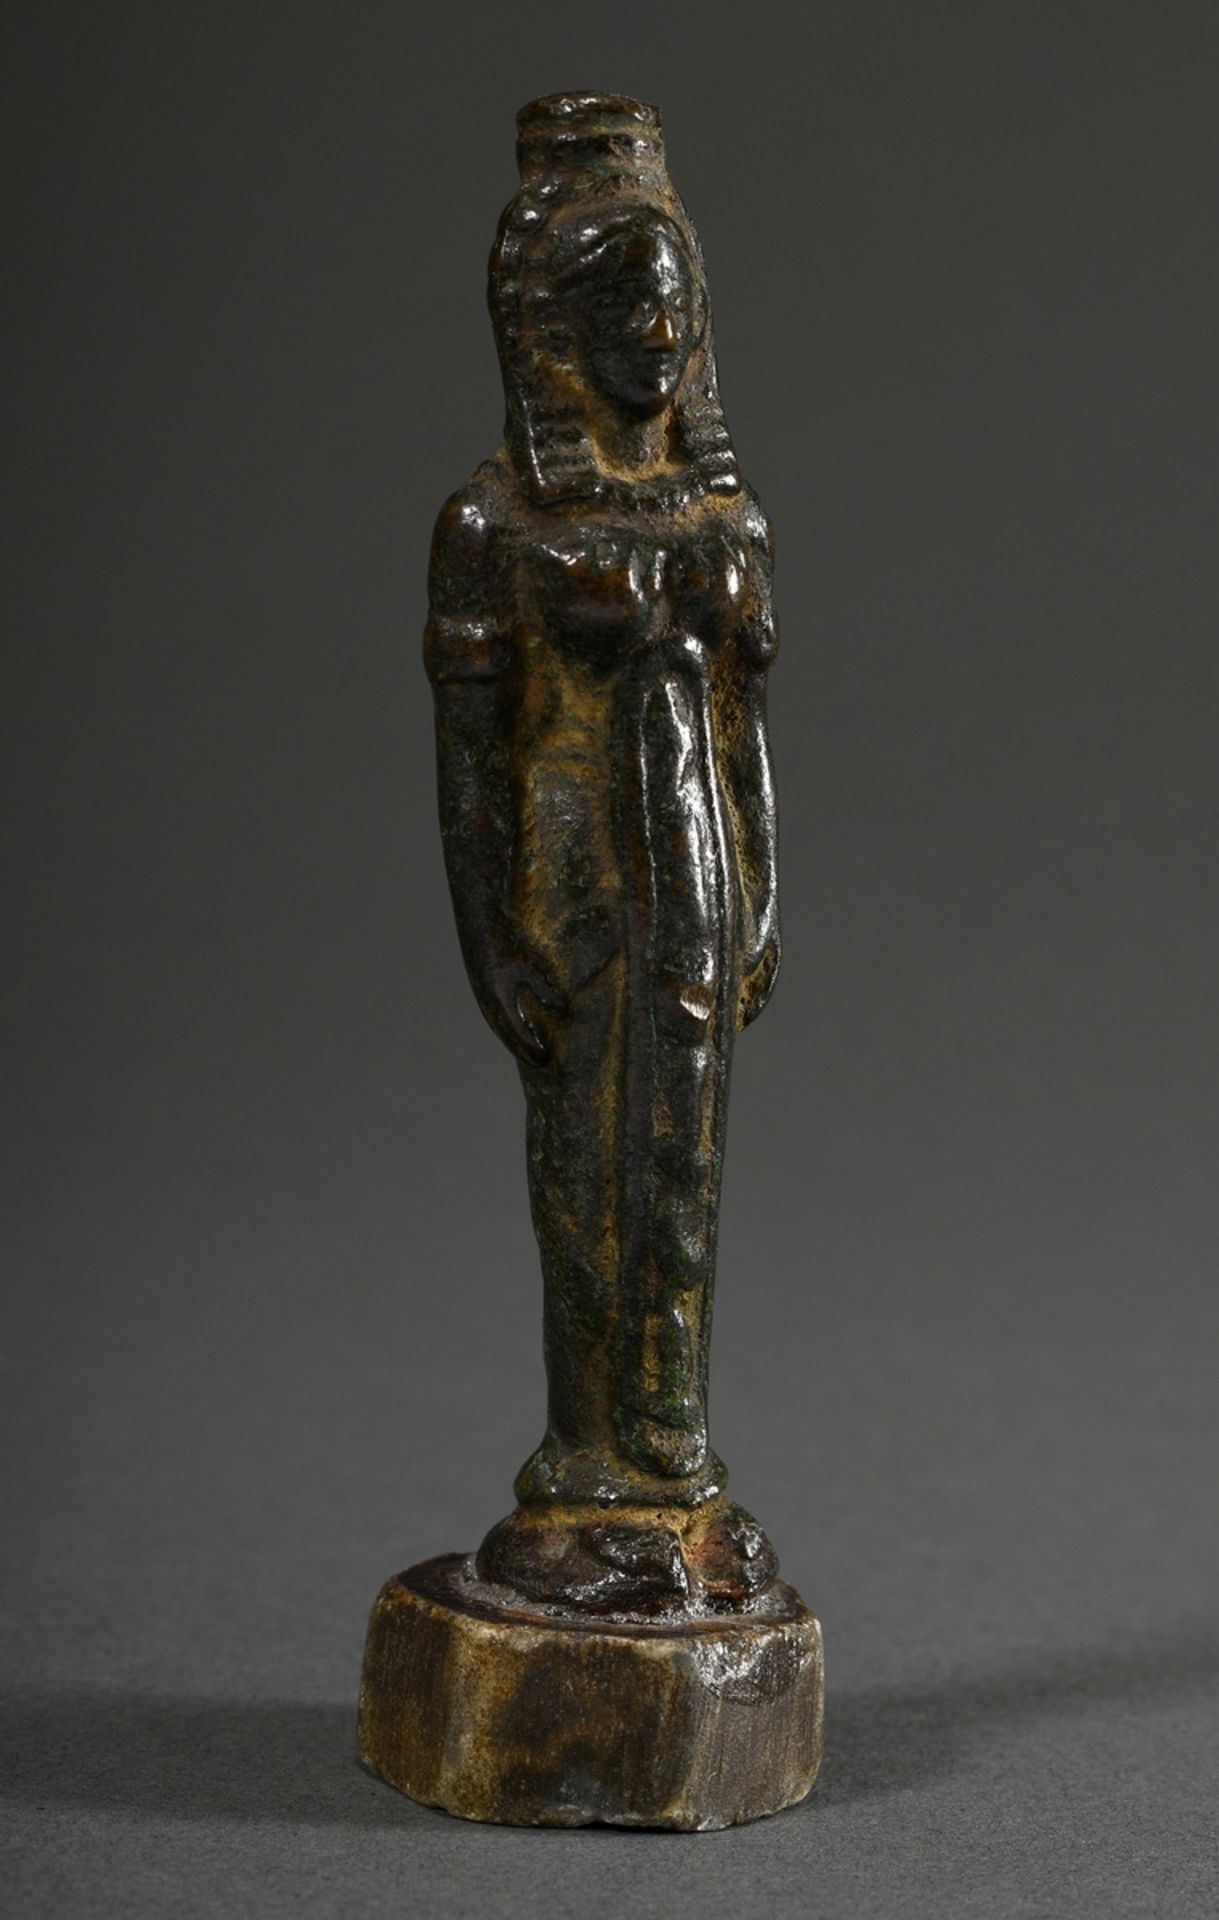 Small statuette "Female Egyptian deity", bronze with greenish patina, mounted/glued on marble base,